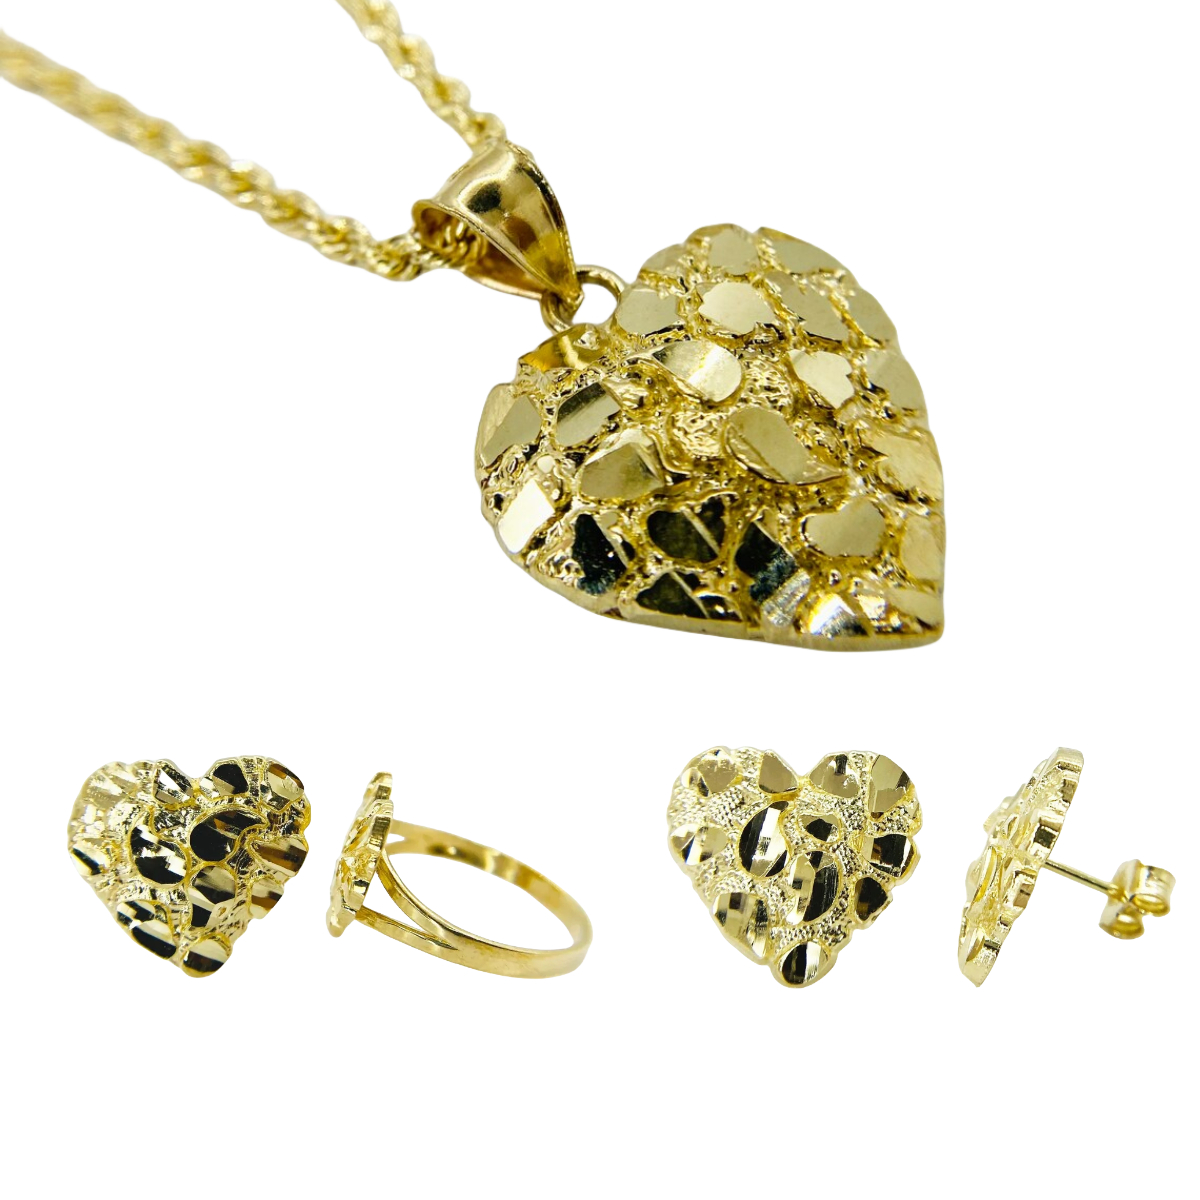 Gold Plated Love Heart Set Personalized Name Ring And Necklace Stud Earrings